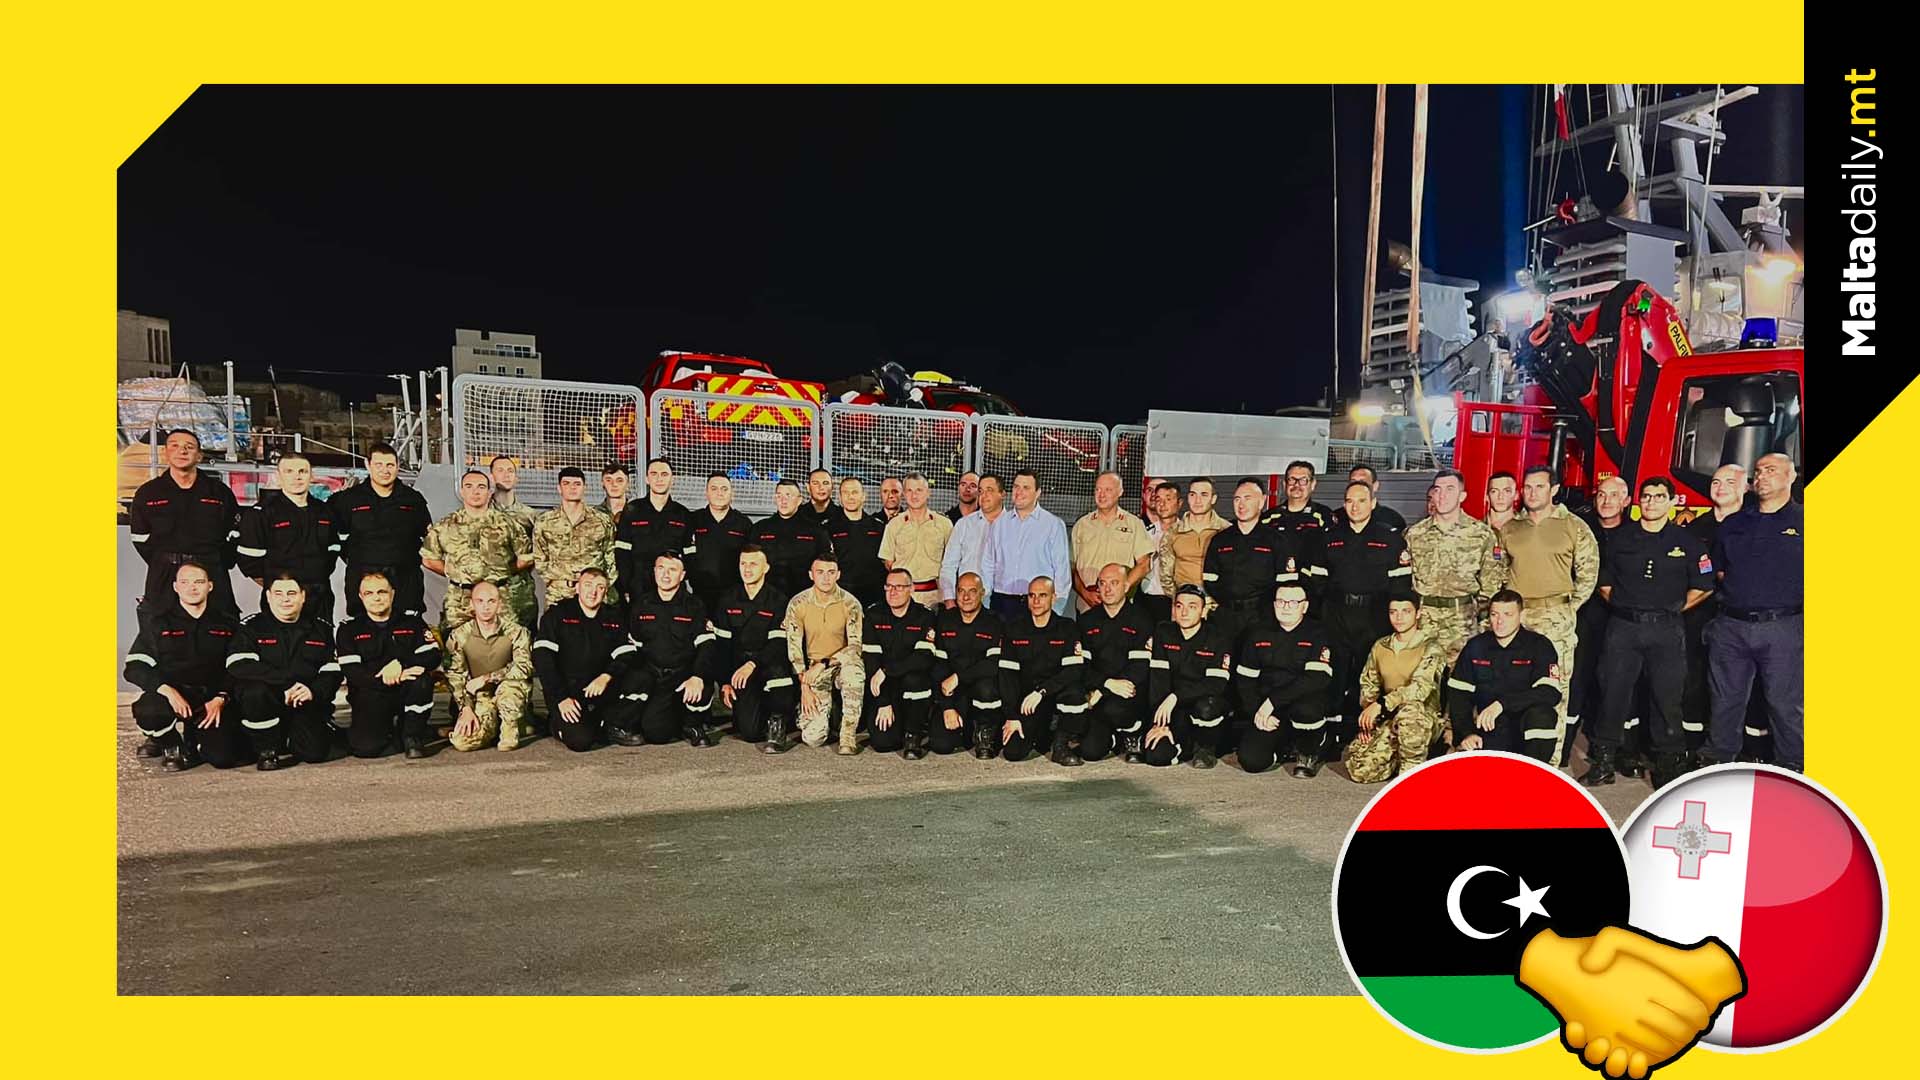 Civil Protection And AFM Aid To Libya